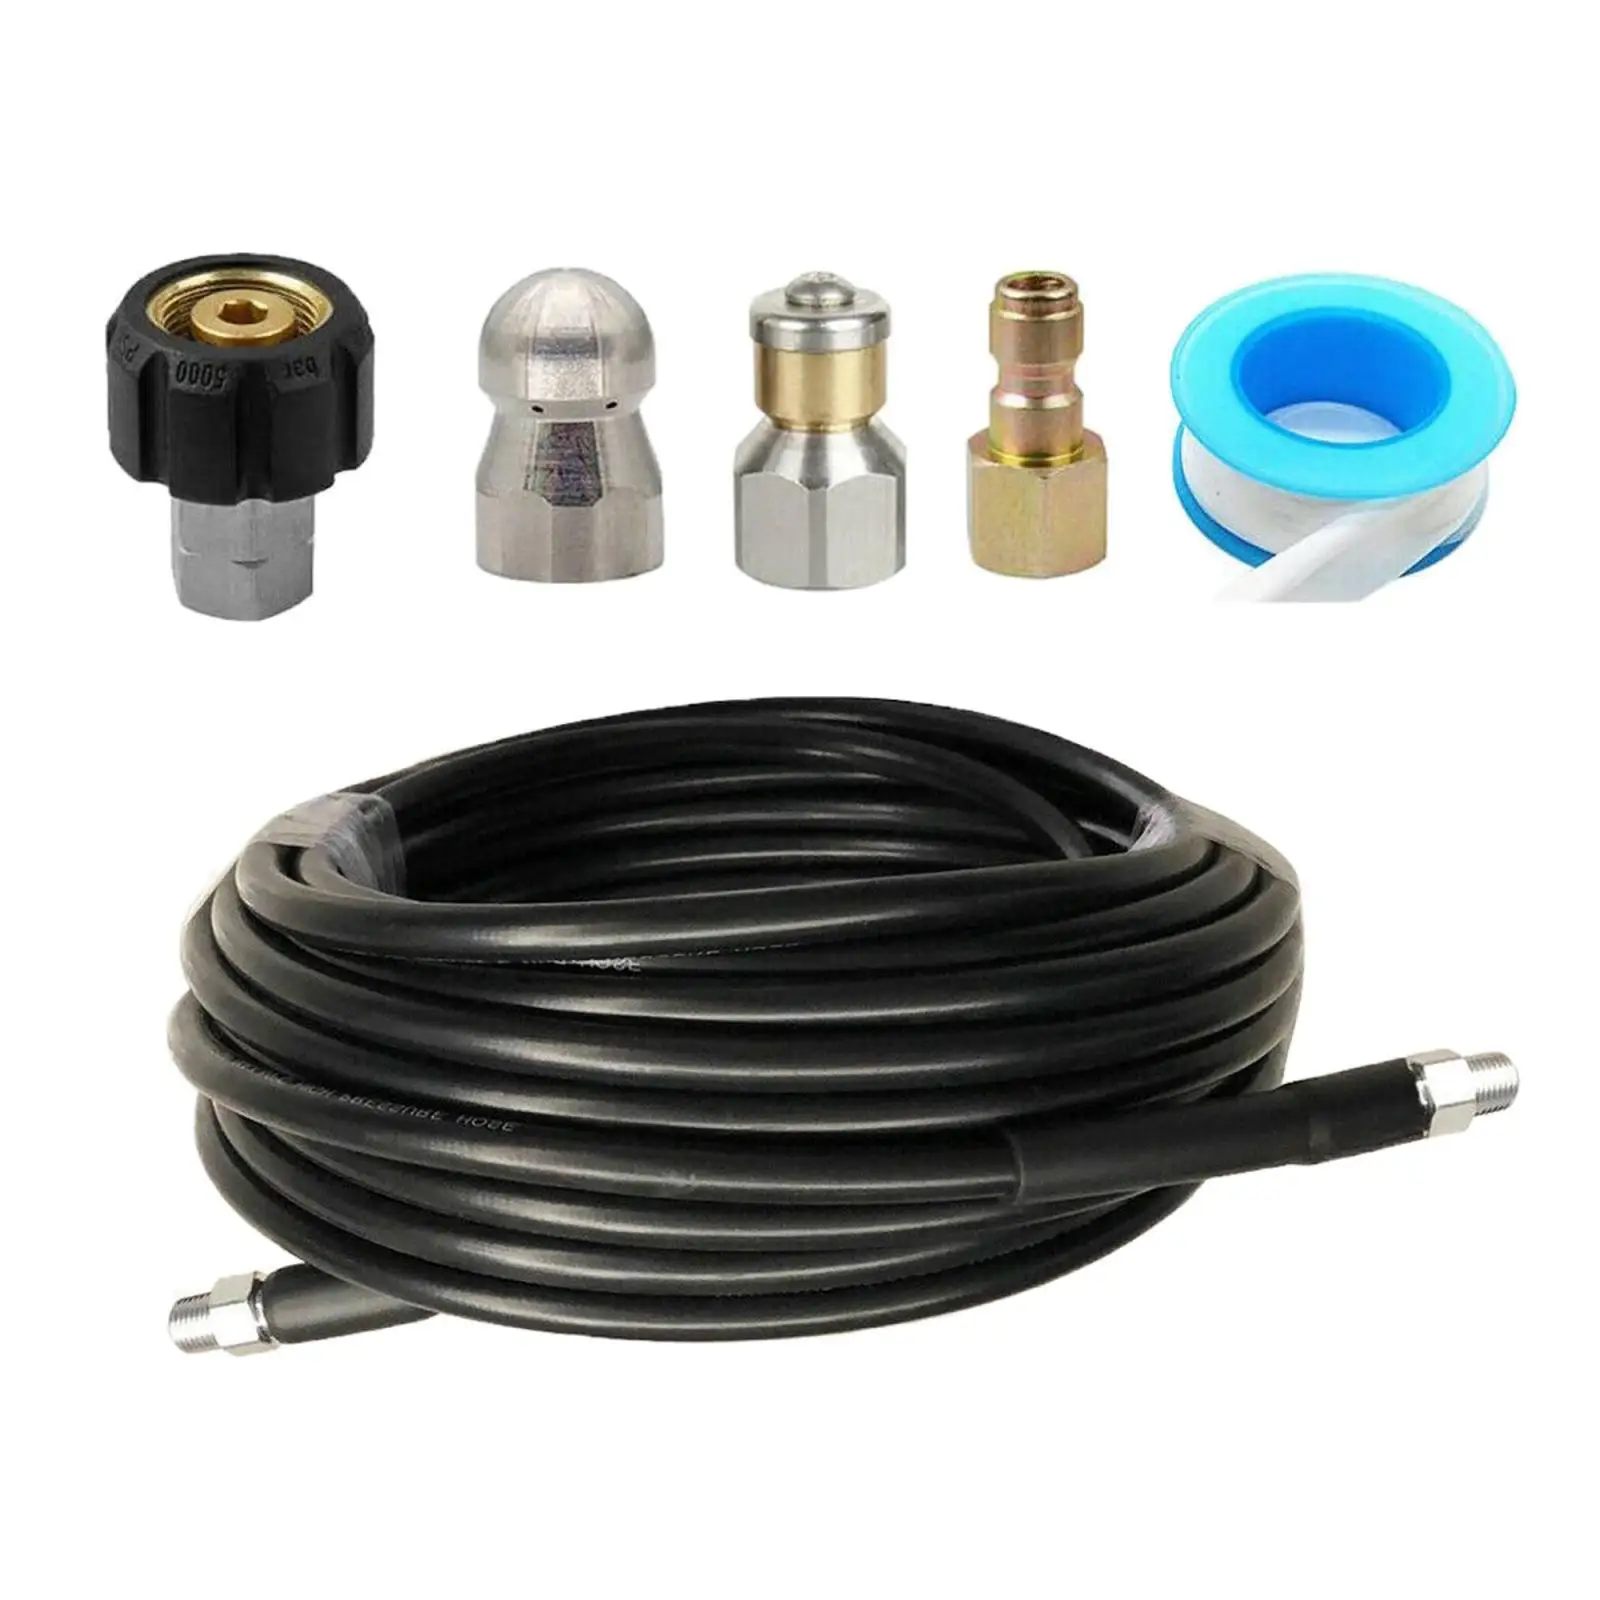 1x Sewer  for Pressure Washer 5800 PSI Drain Cleaning Hose,15